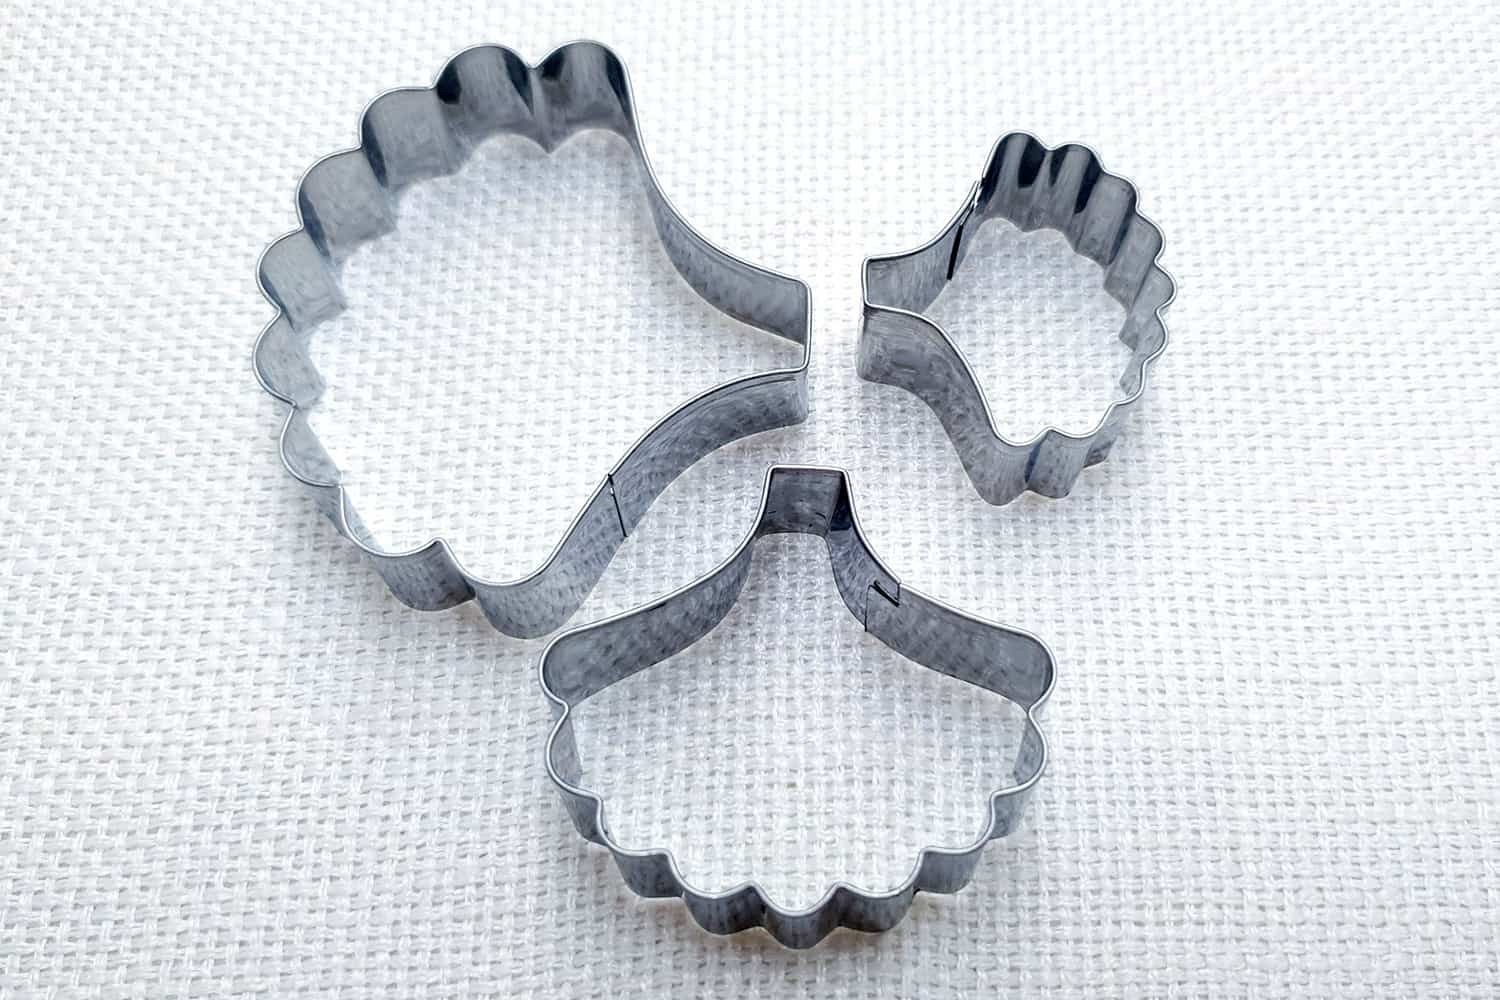 3-pcs Stainless steel broccoli shape cutters #22053